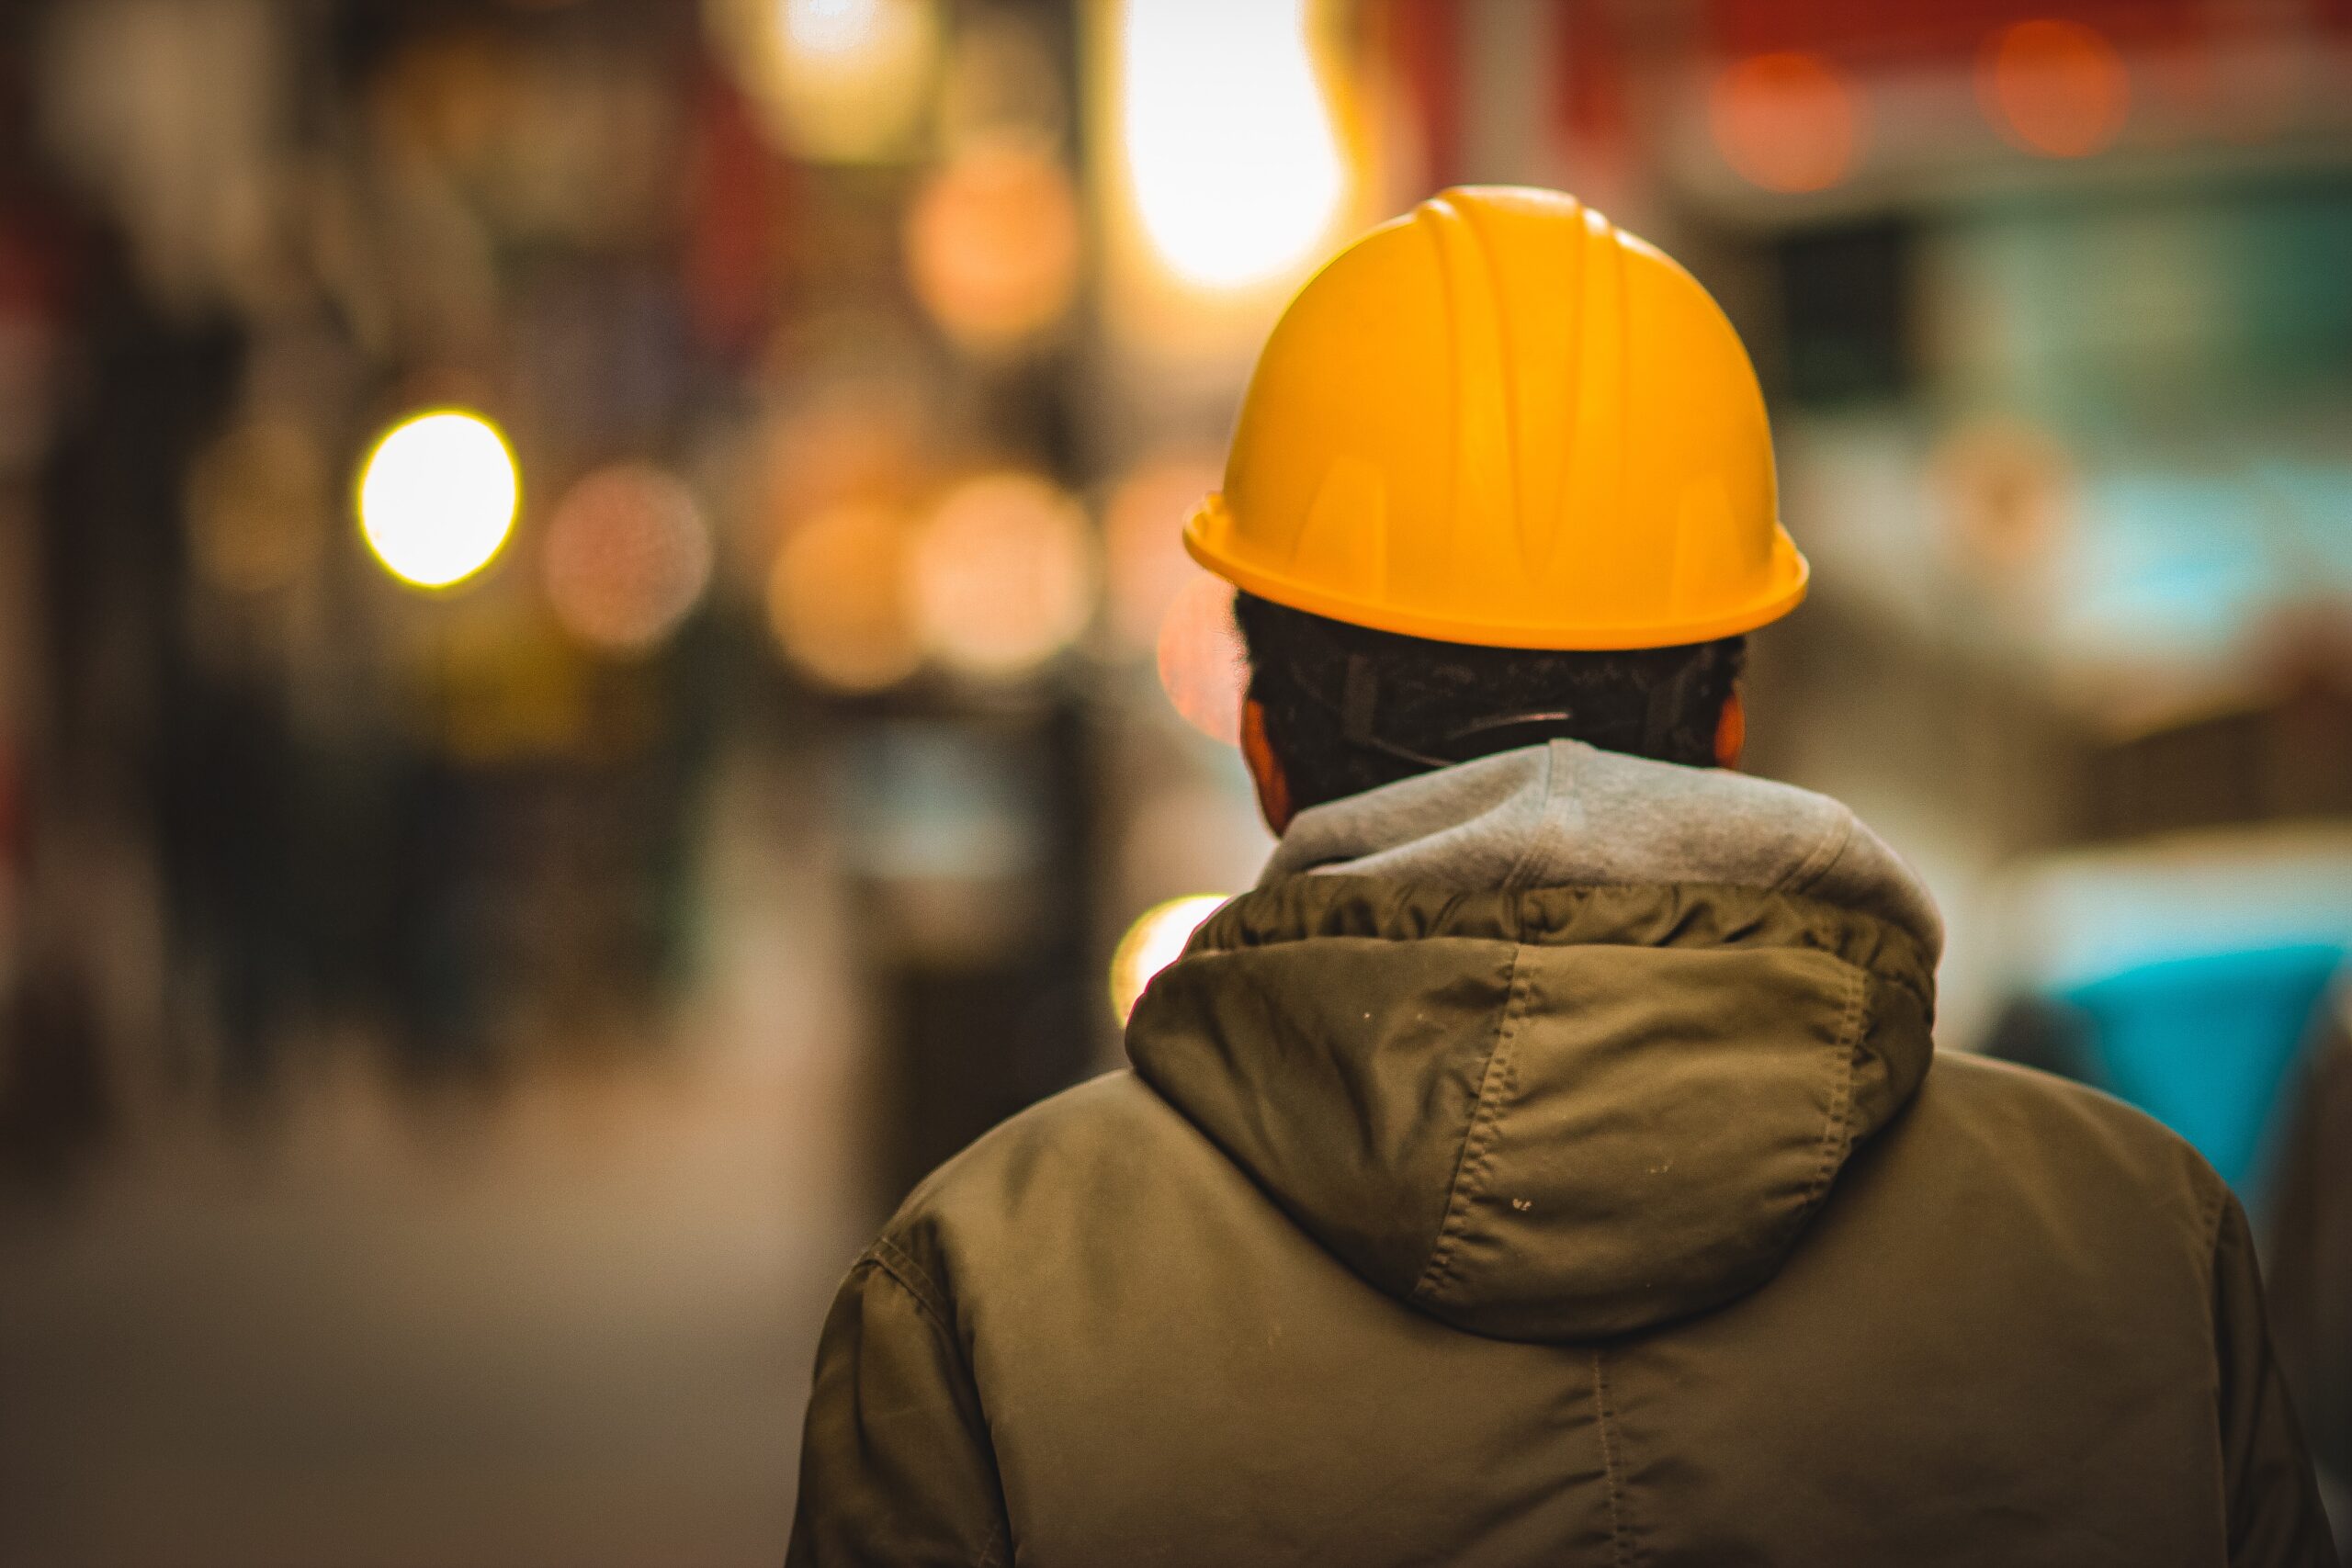 Hardhat on construction worker representing access to long term disability benefits when on leave